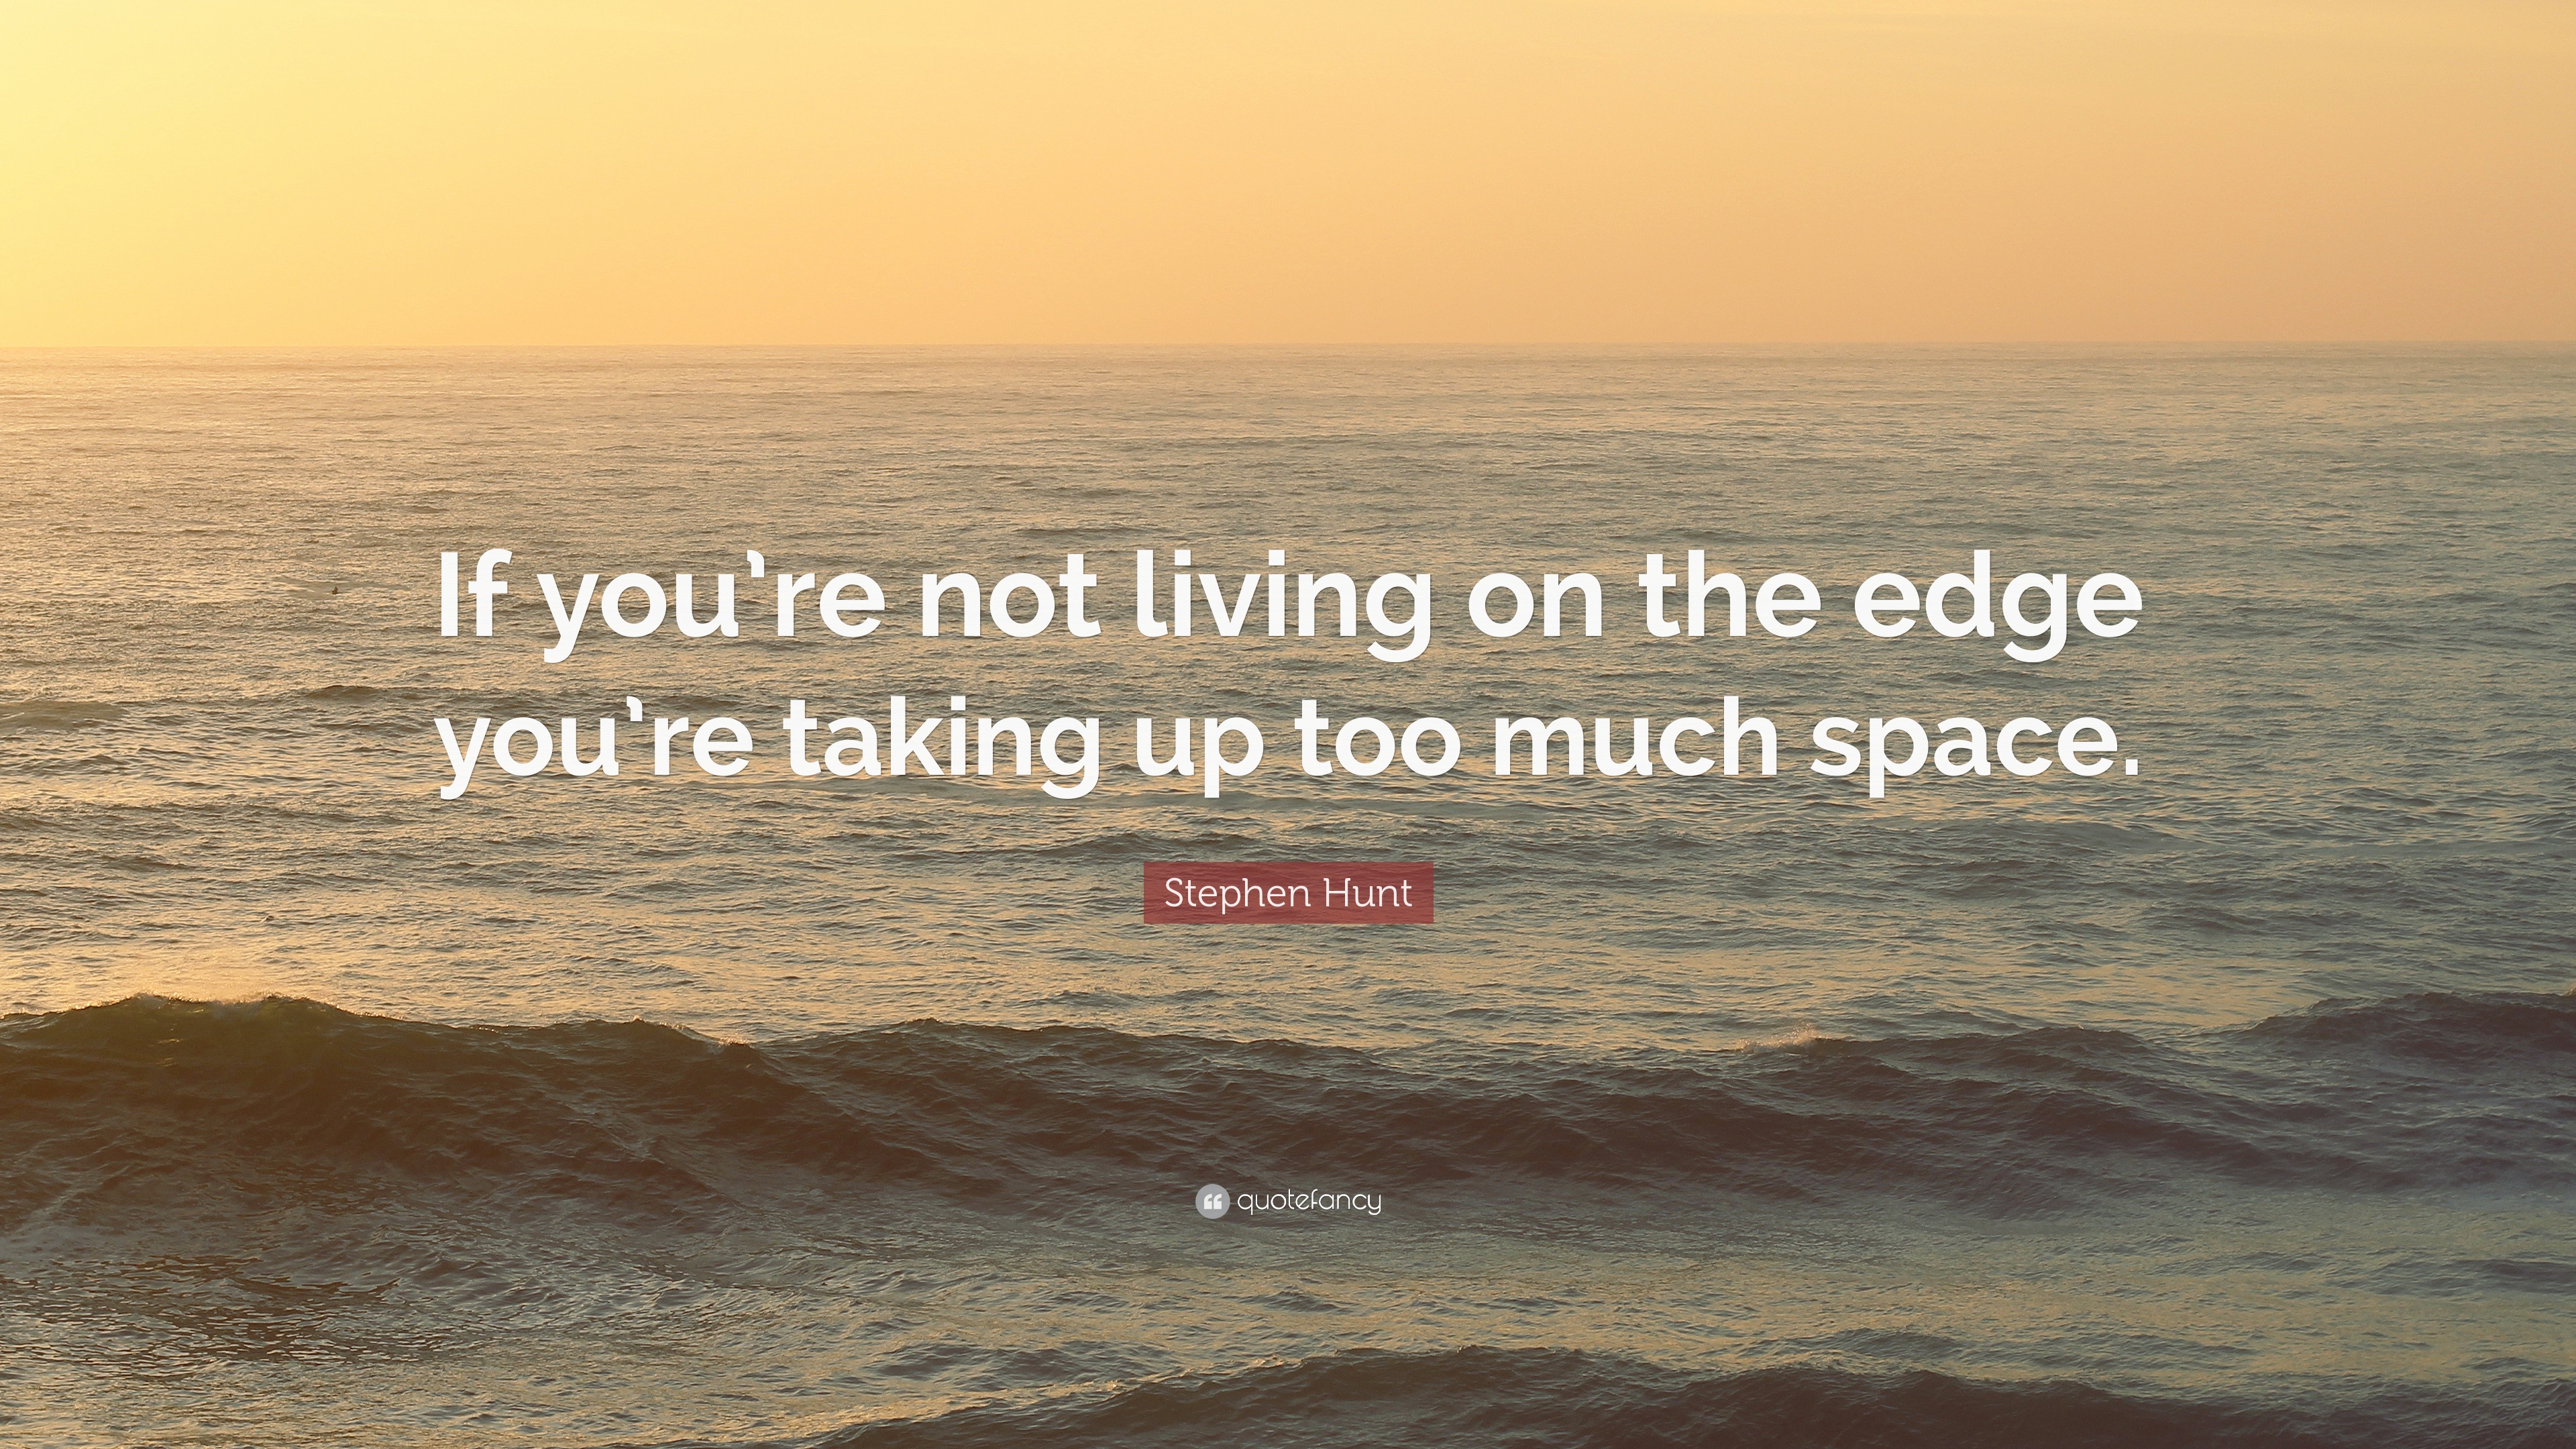 Stephen Hunt Quote: “If you’re not living on the edge you’re taking up